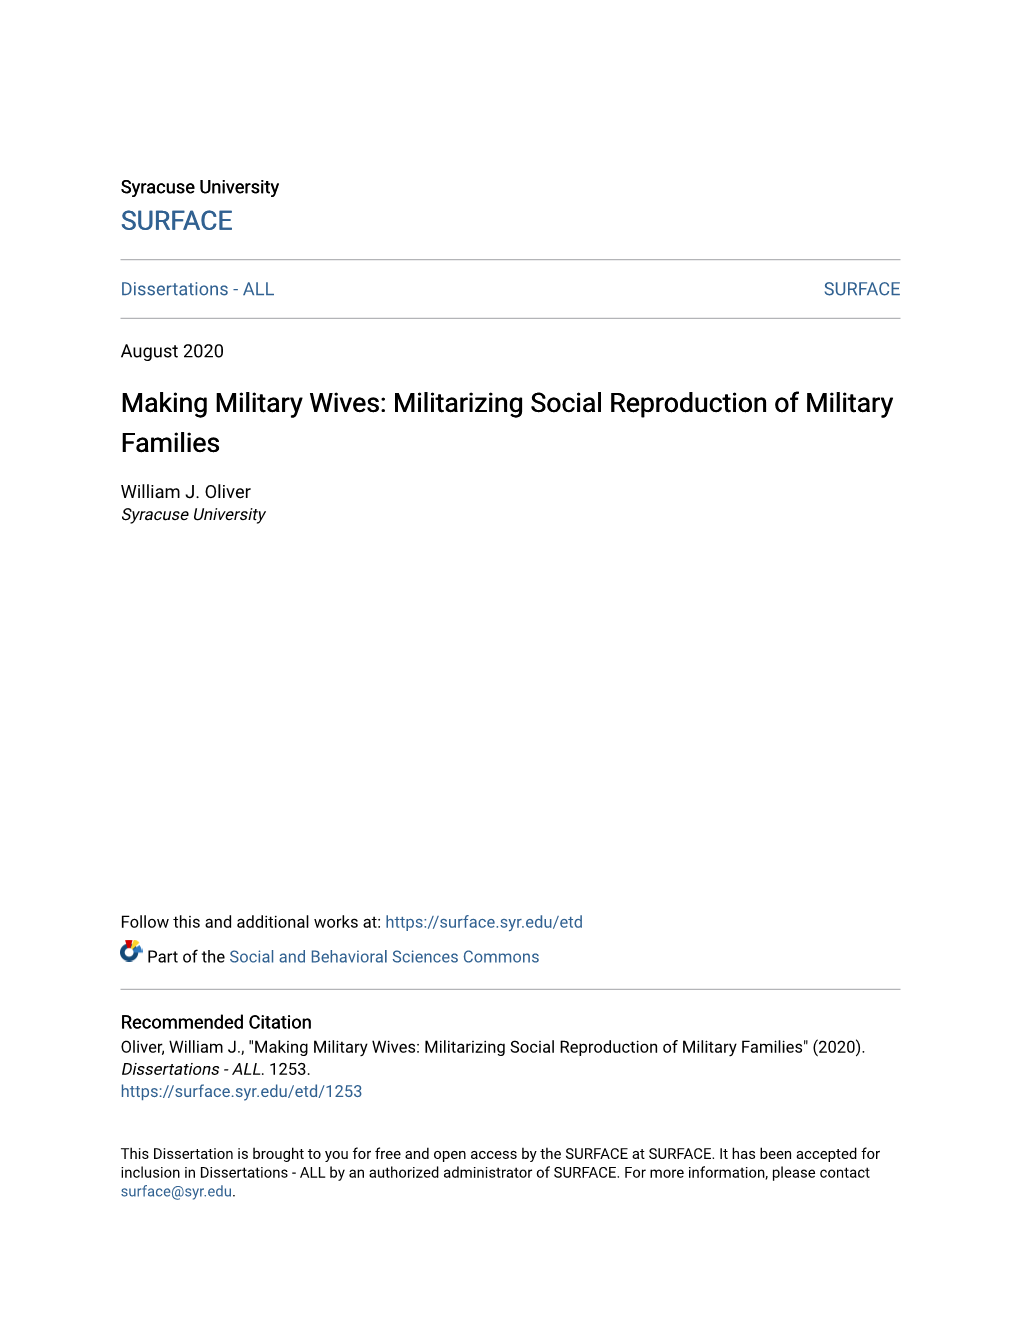 Making Military Wives: Militarizing Social Reproduction of Military Families